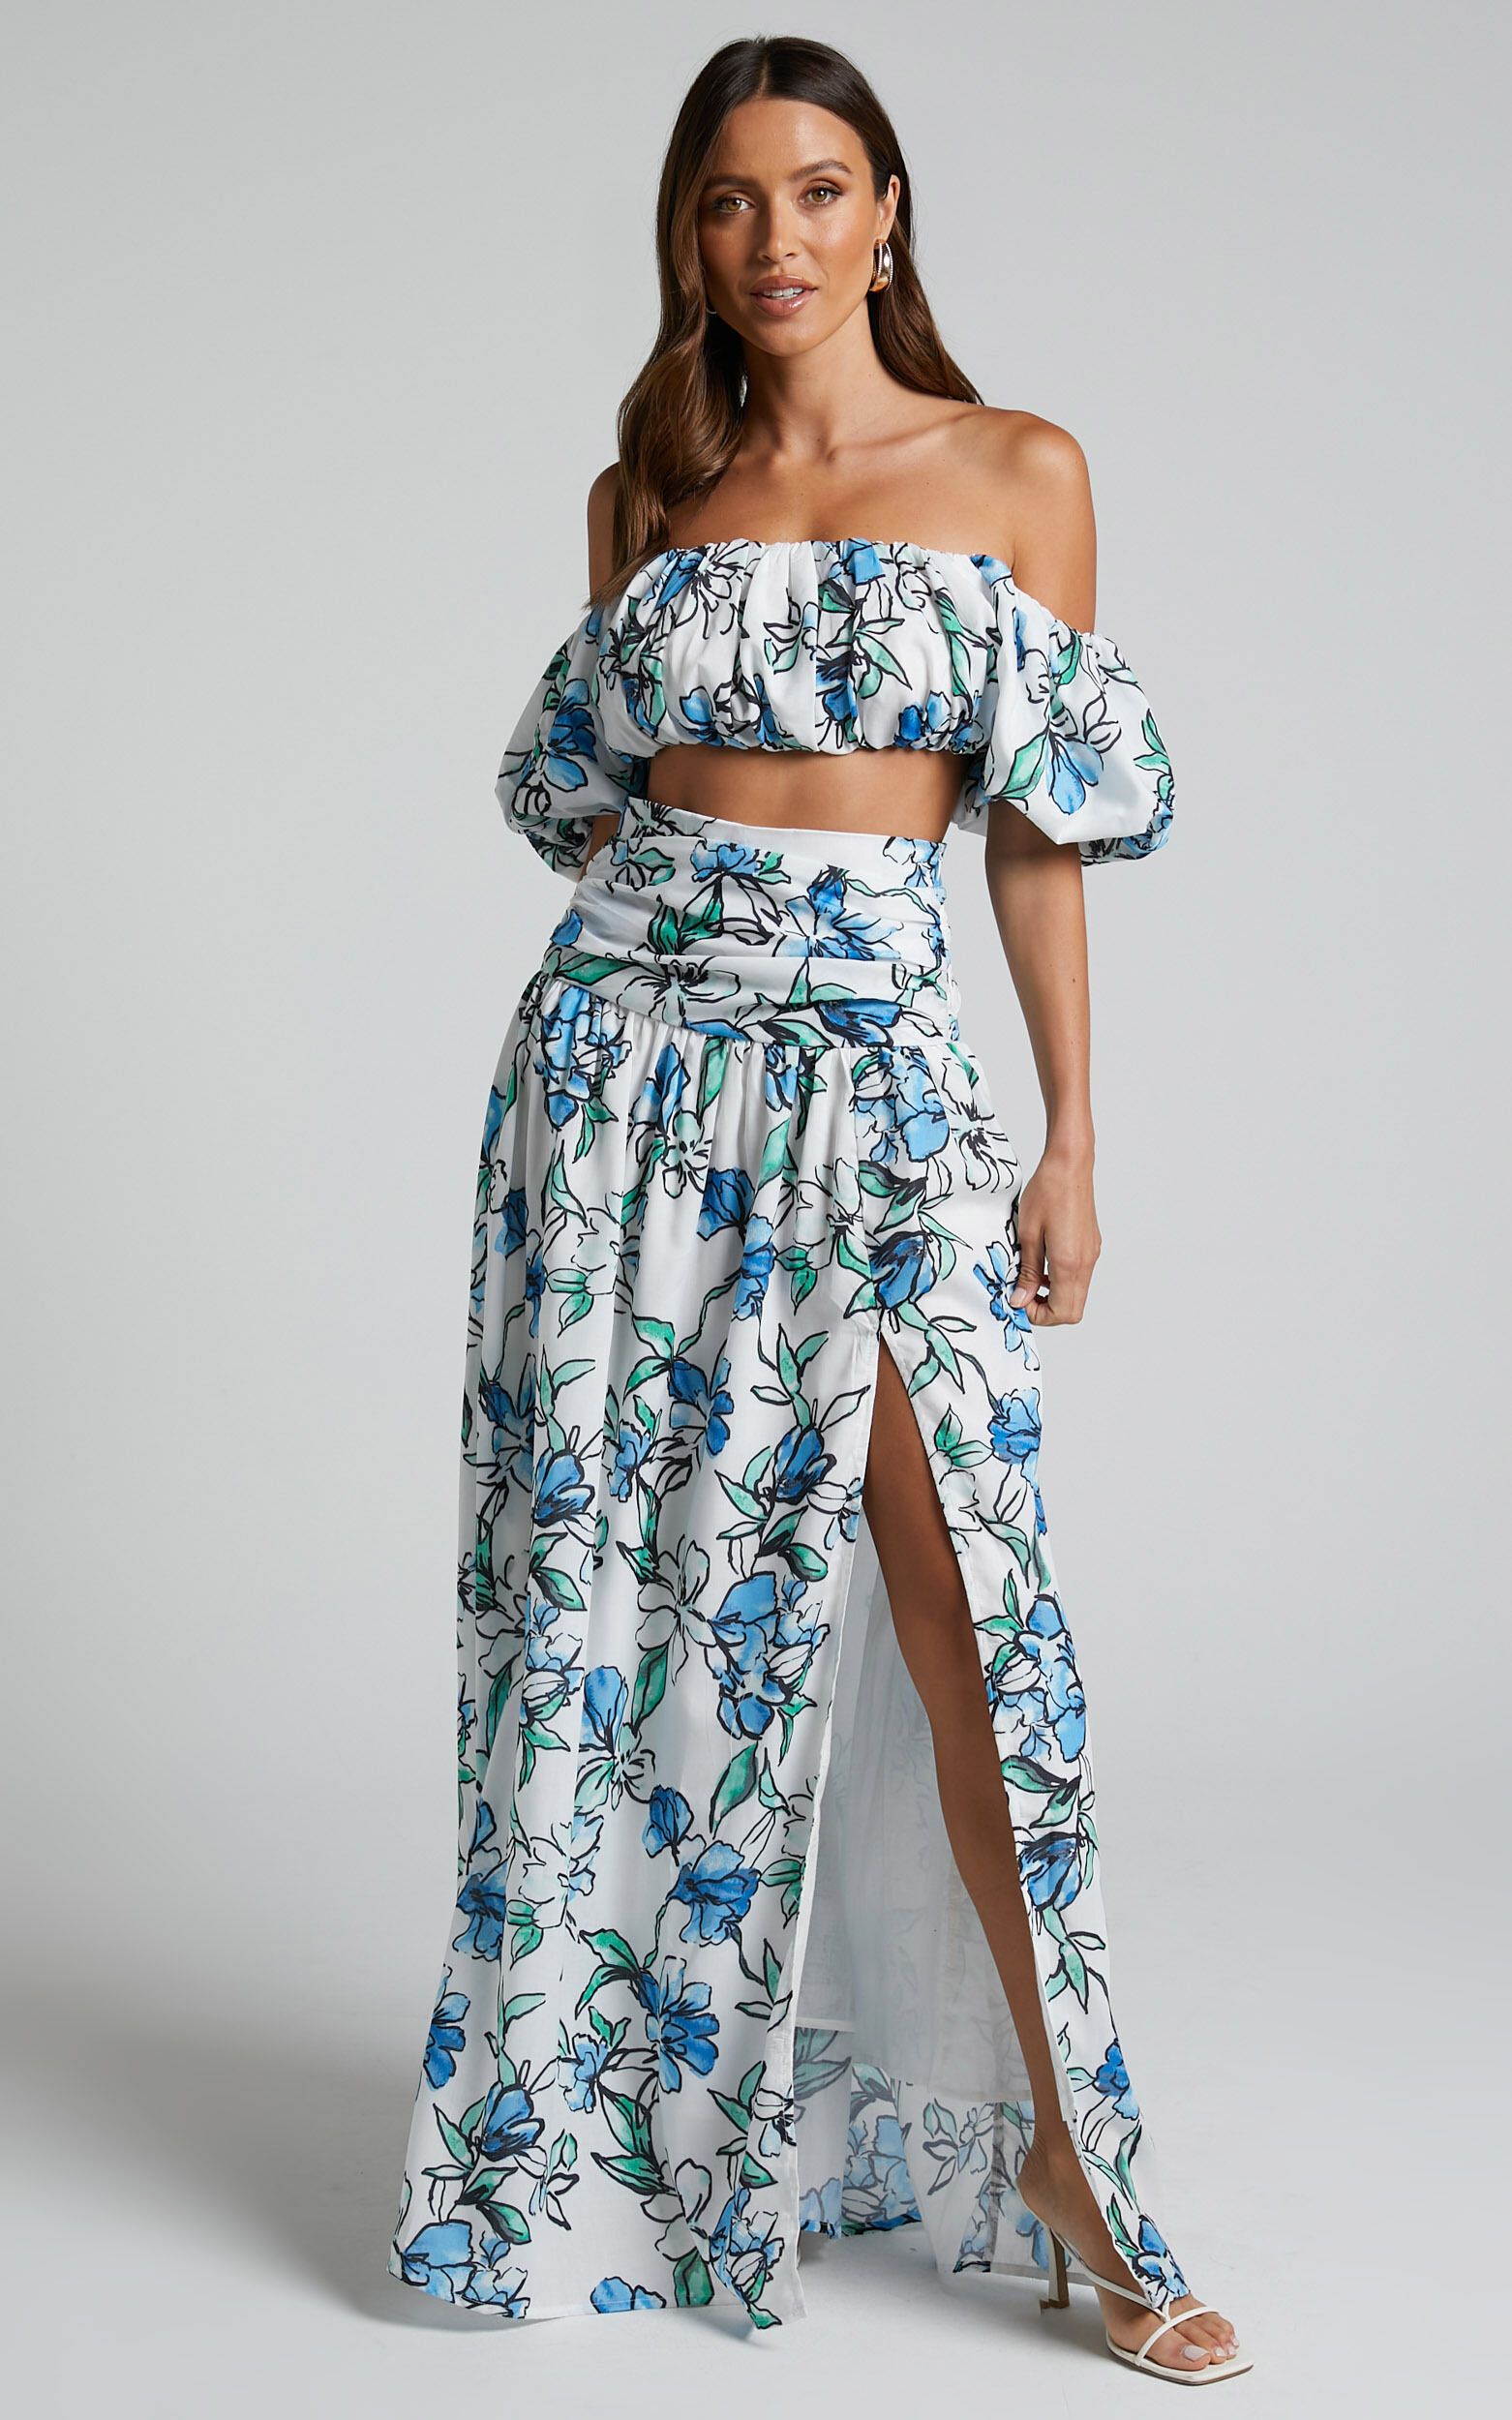 Alezia Two Piece Set - Off Shoulder Crop Top and Gathered Waist Midi Skirt in Brush Stroke Floral | Showpo (ANZ)